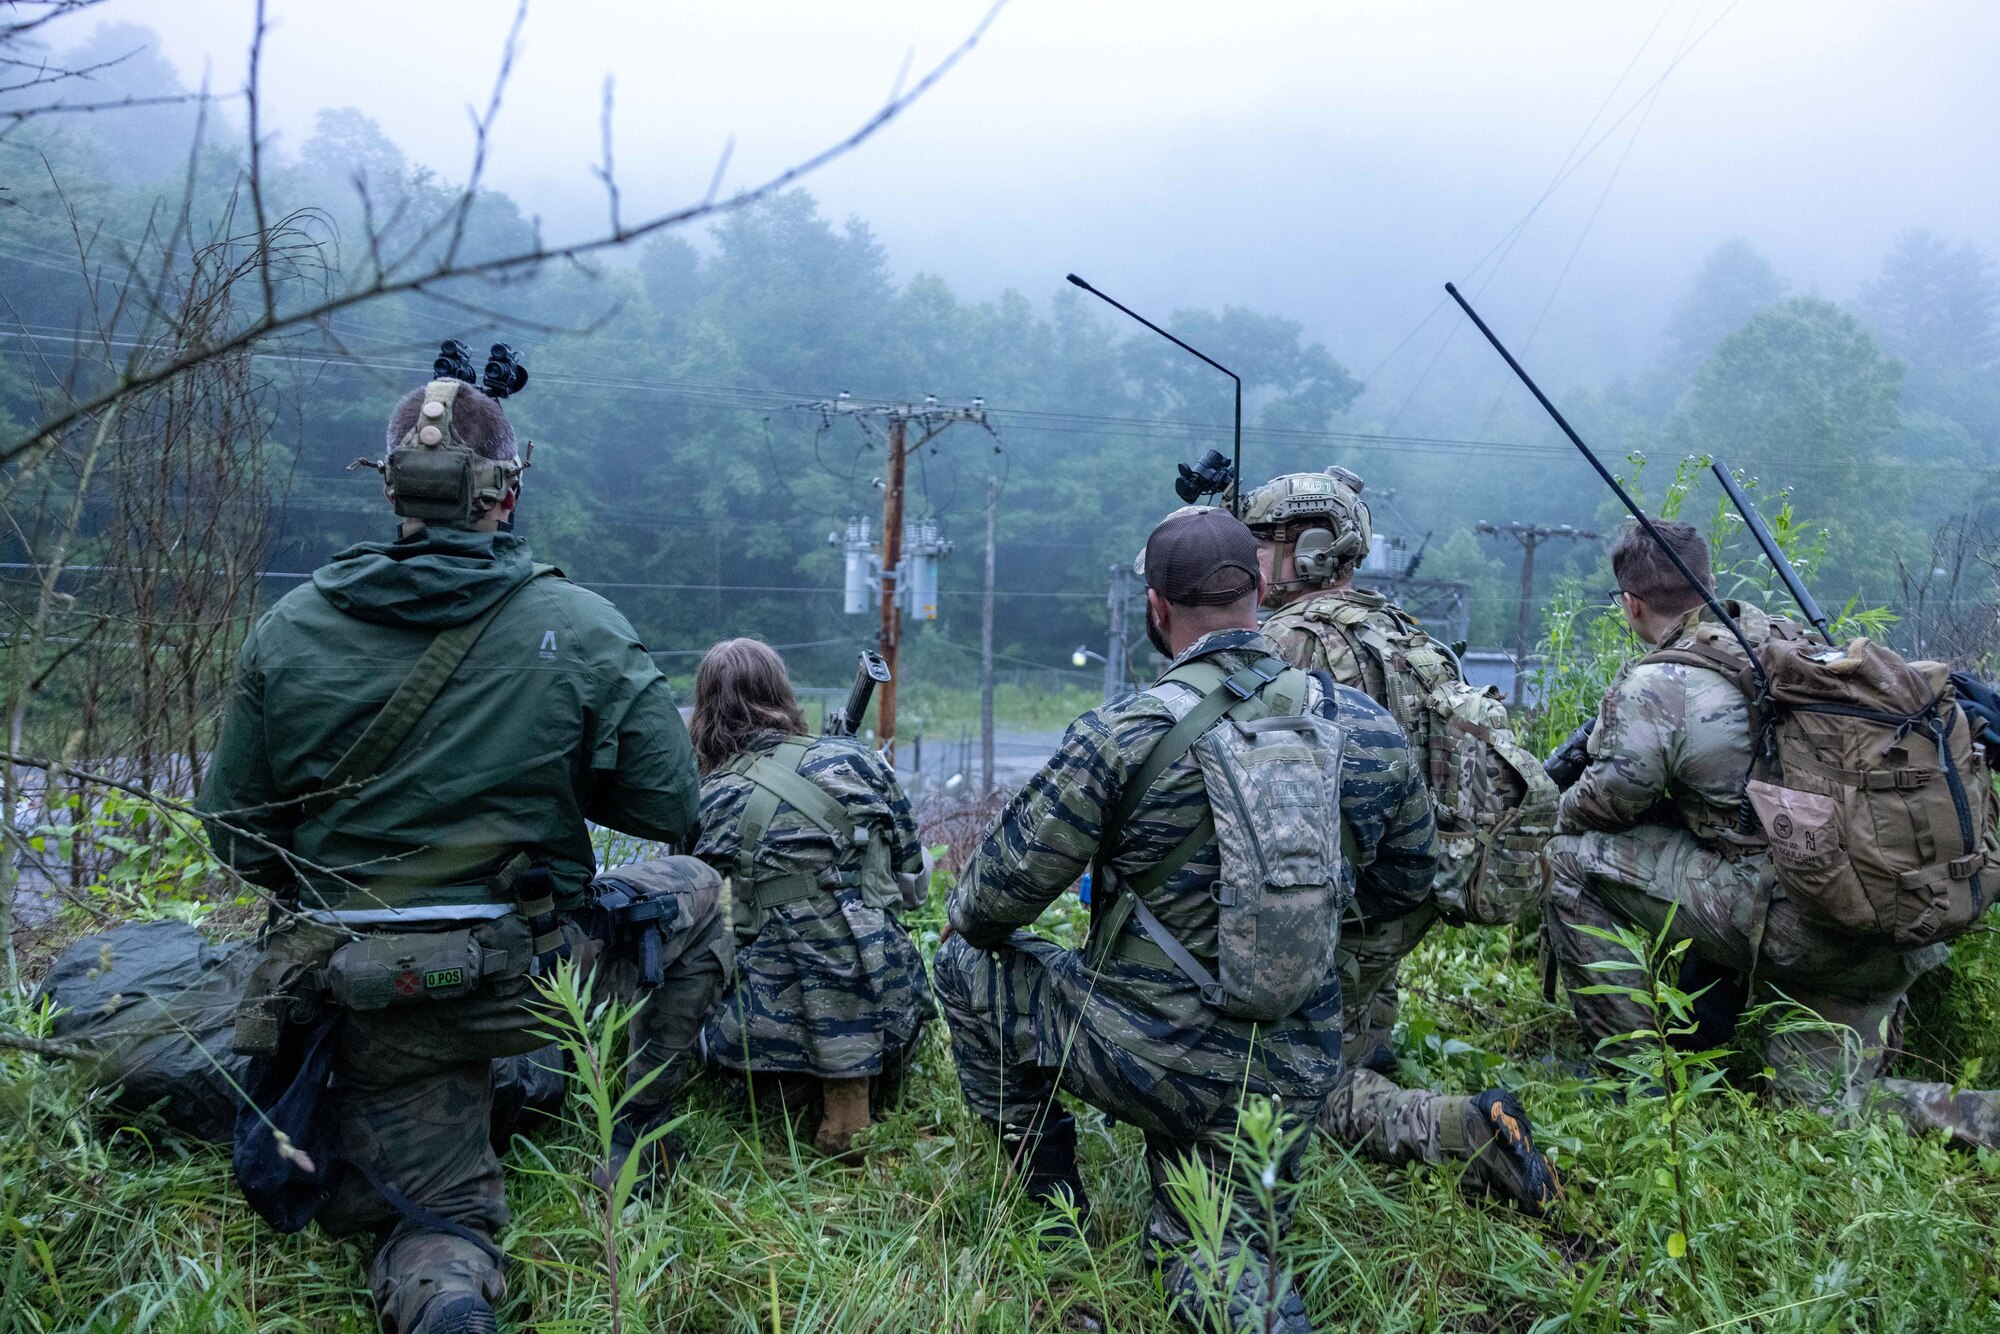 Members of Charlie Company, 5th Battalion, 19th Special Forces Group (Airborne); Bravo Company, 92d Civil Affairs Battalion (Airborne); Bravo Company, 6th Psychological Operations Battalion (Airborne); 193rd Special Operations Medical Group; 4th Air Naval Gunfire Liaison Company; 4th Civil Affairs Group; and the 4th Marine Corps Advisor Company Alpha, participated with allies and partners from multiple nations in the Ridge Runner Irregular Warfare Exercise throughout West Virginia for two weeks in May and June 2023.